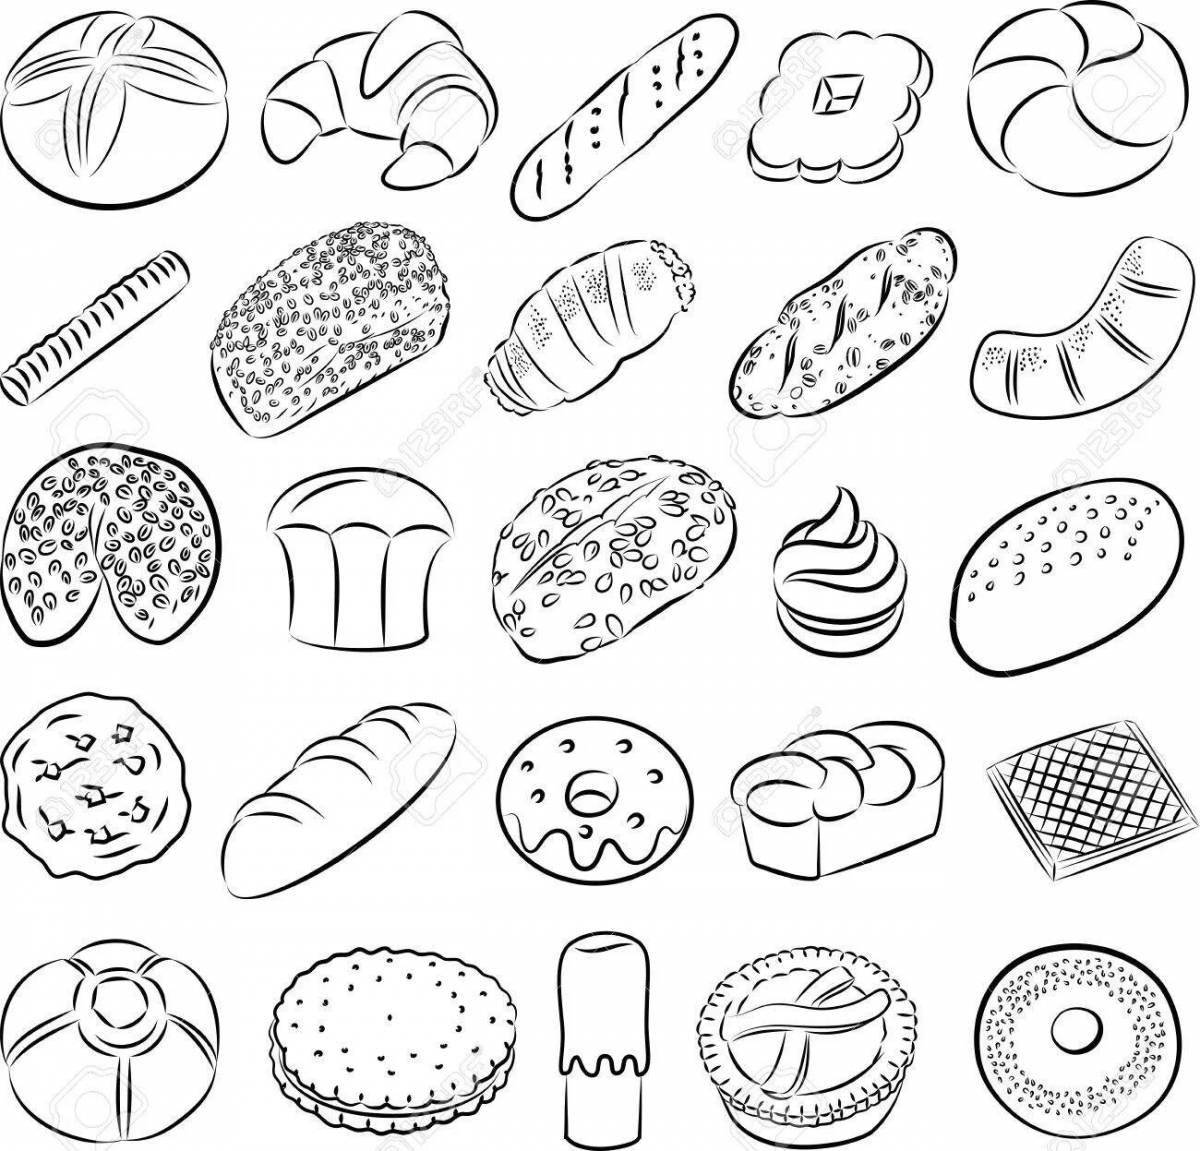 Exciting pastry coloring pages for kids